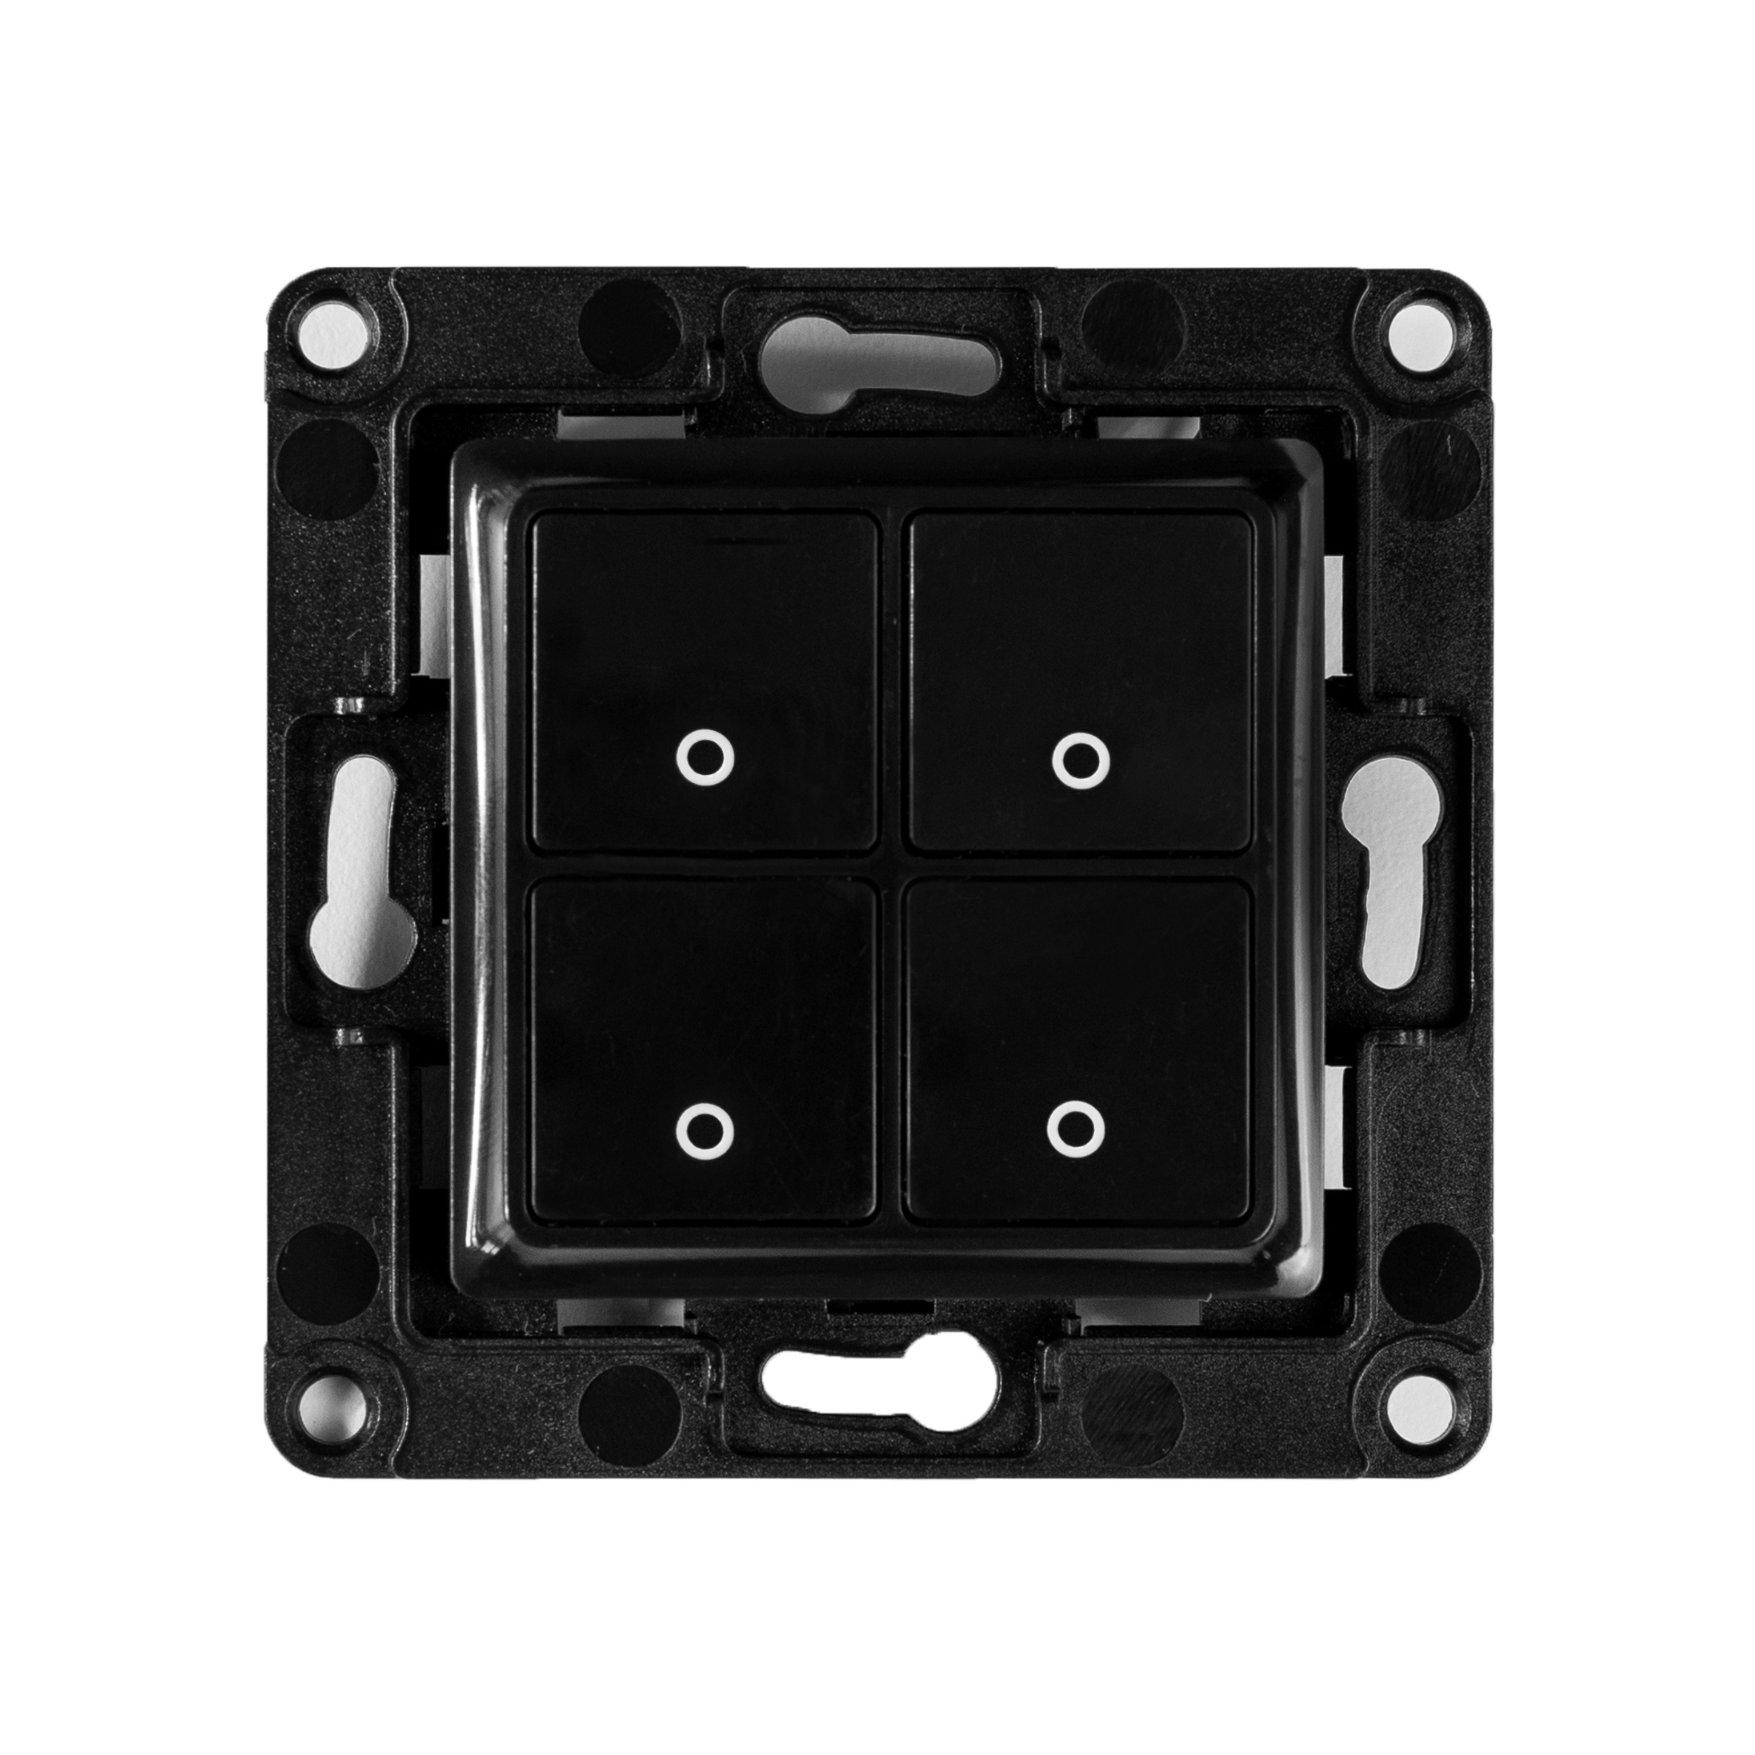 shelly/shelly-wall-switch-black-1-parent-img-21